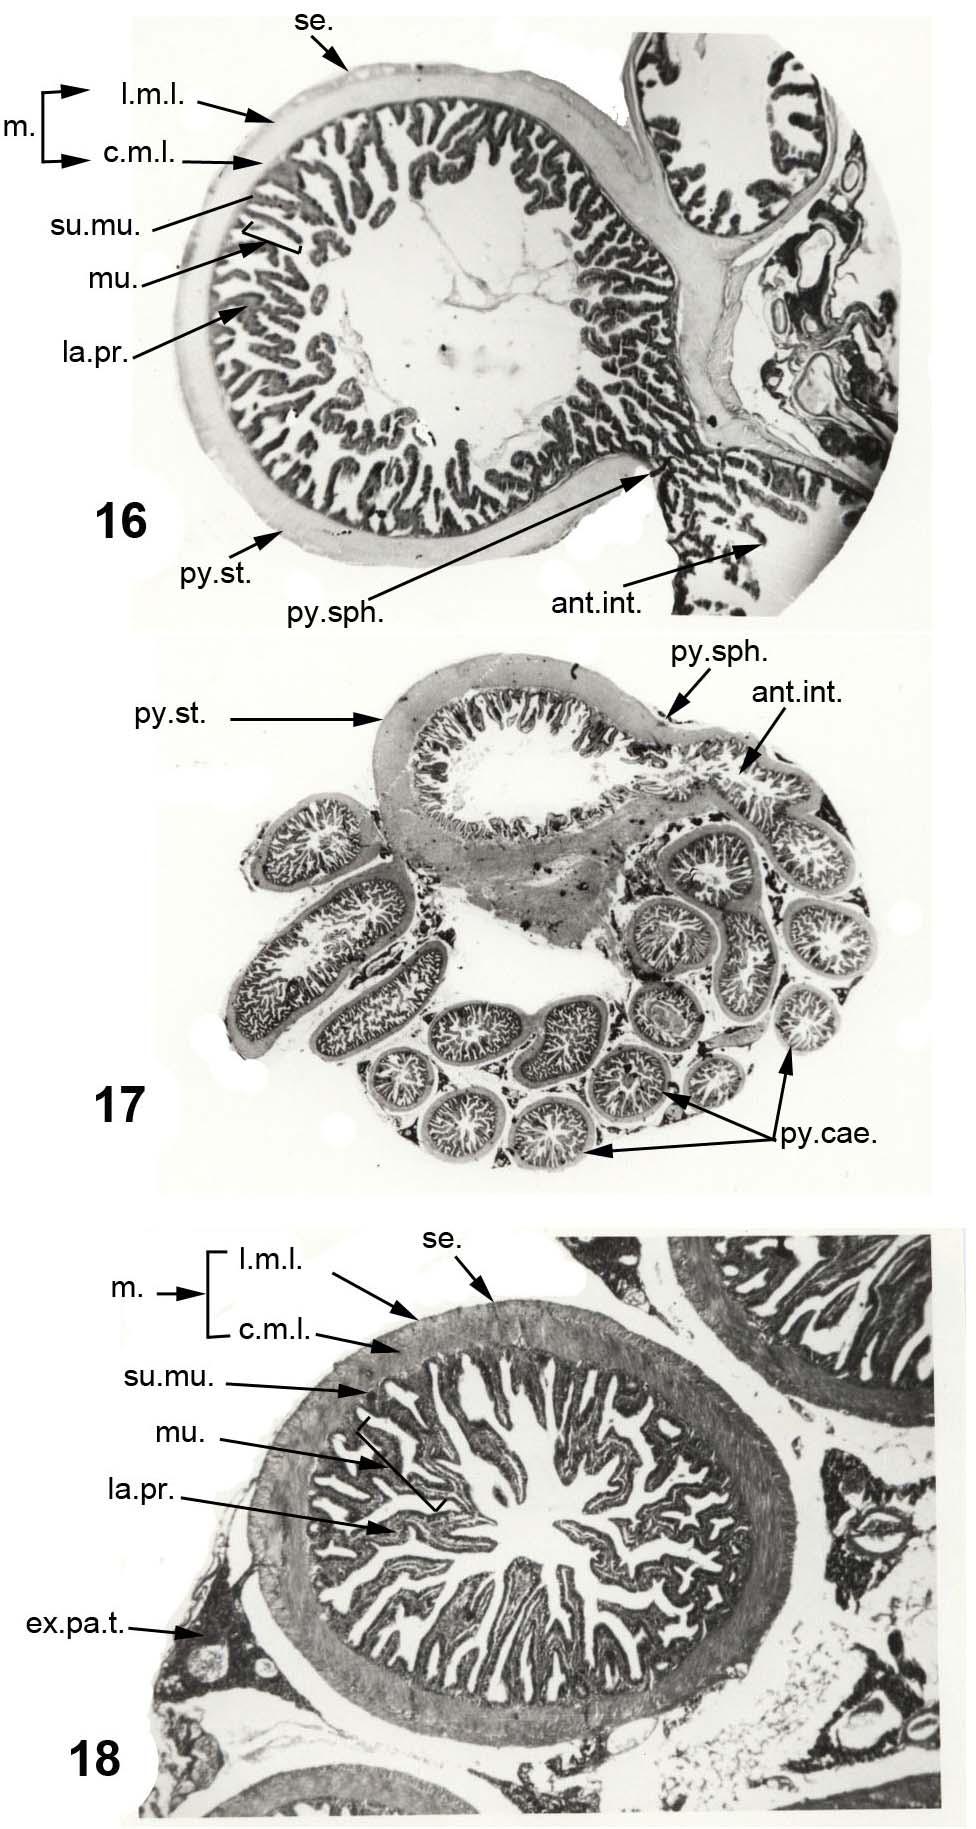 Fig. (16): T.S. of the pyloric stomach showing the absence of the gastric glands and the presence of a pyloric sphincter. H & E stain, X 75. Fig. (17): T.S. of the pyloric stomach showing the pyloric sphincter and sections of pyloric caeca.